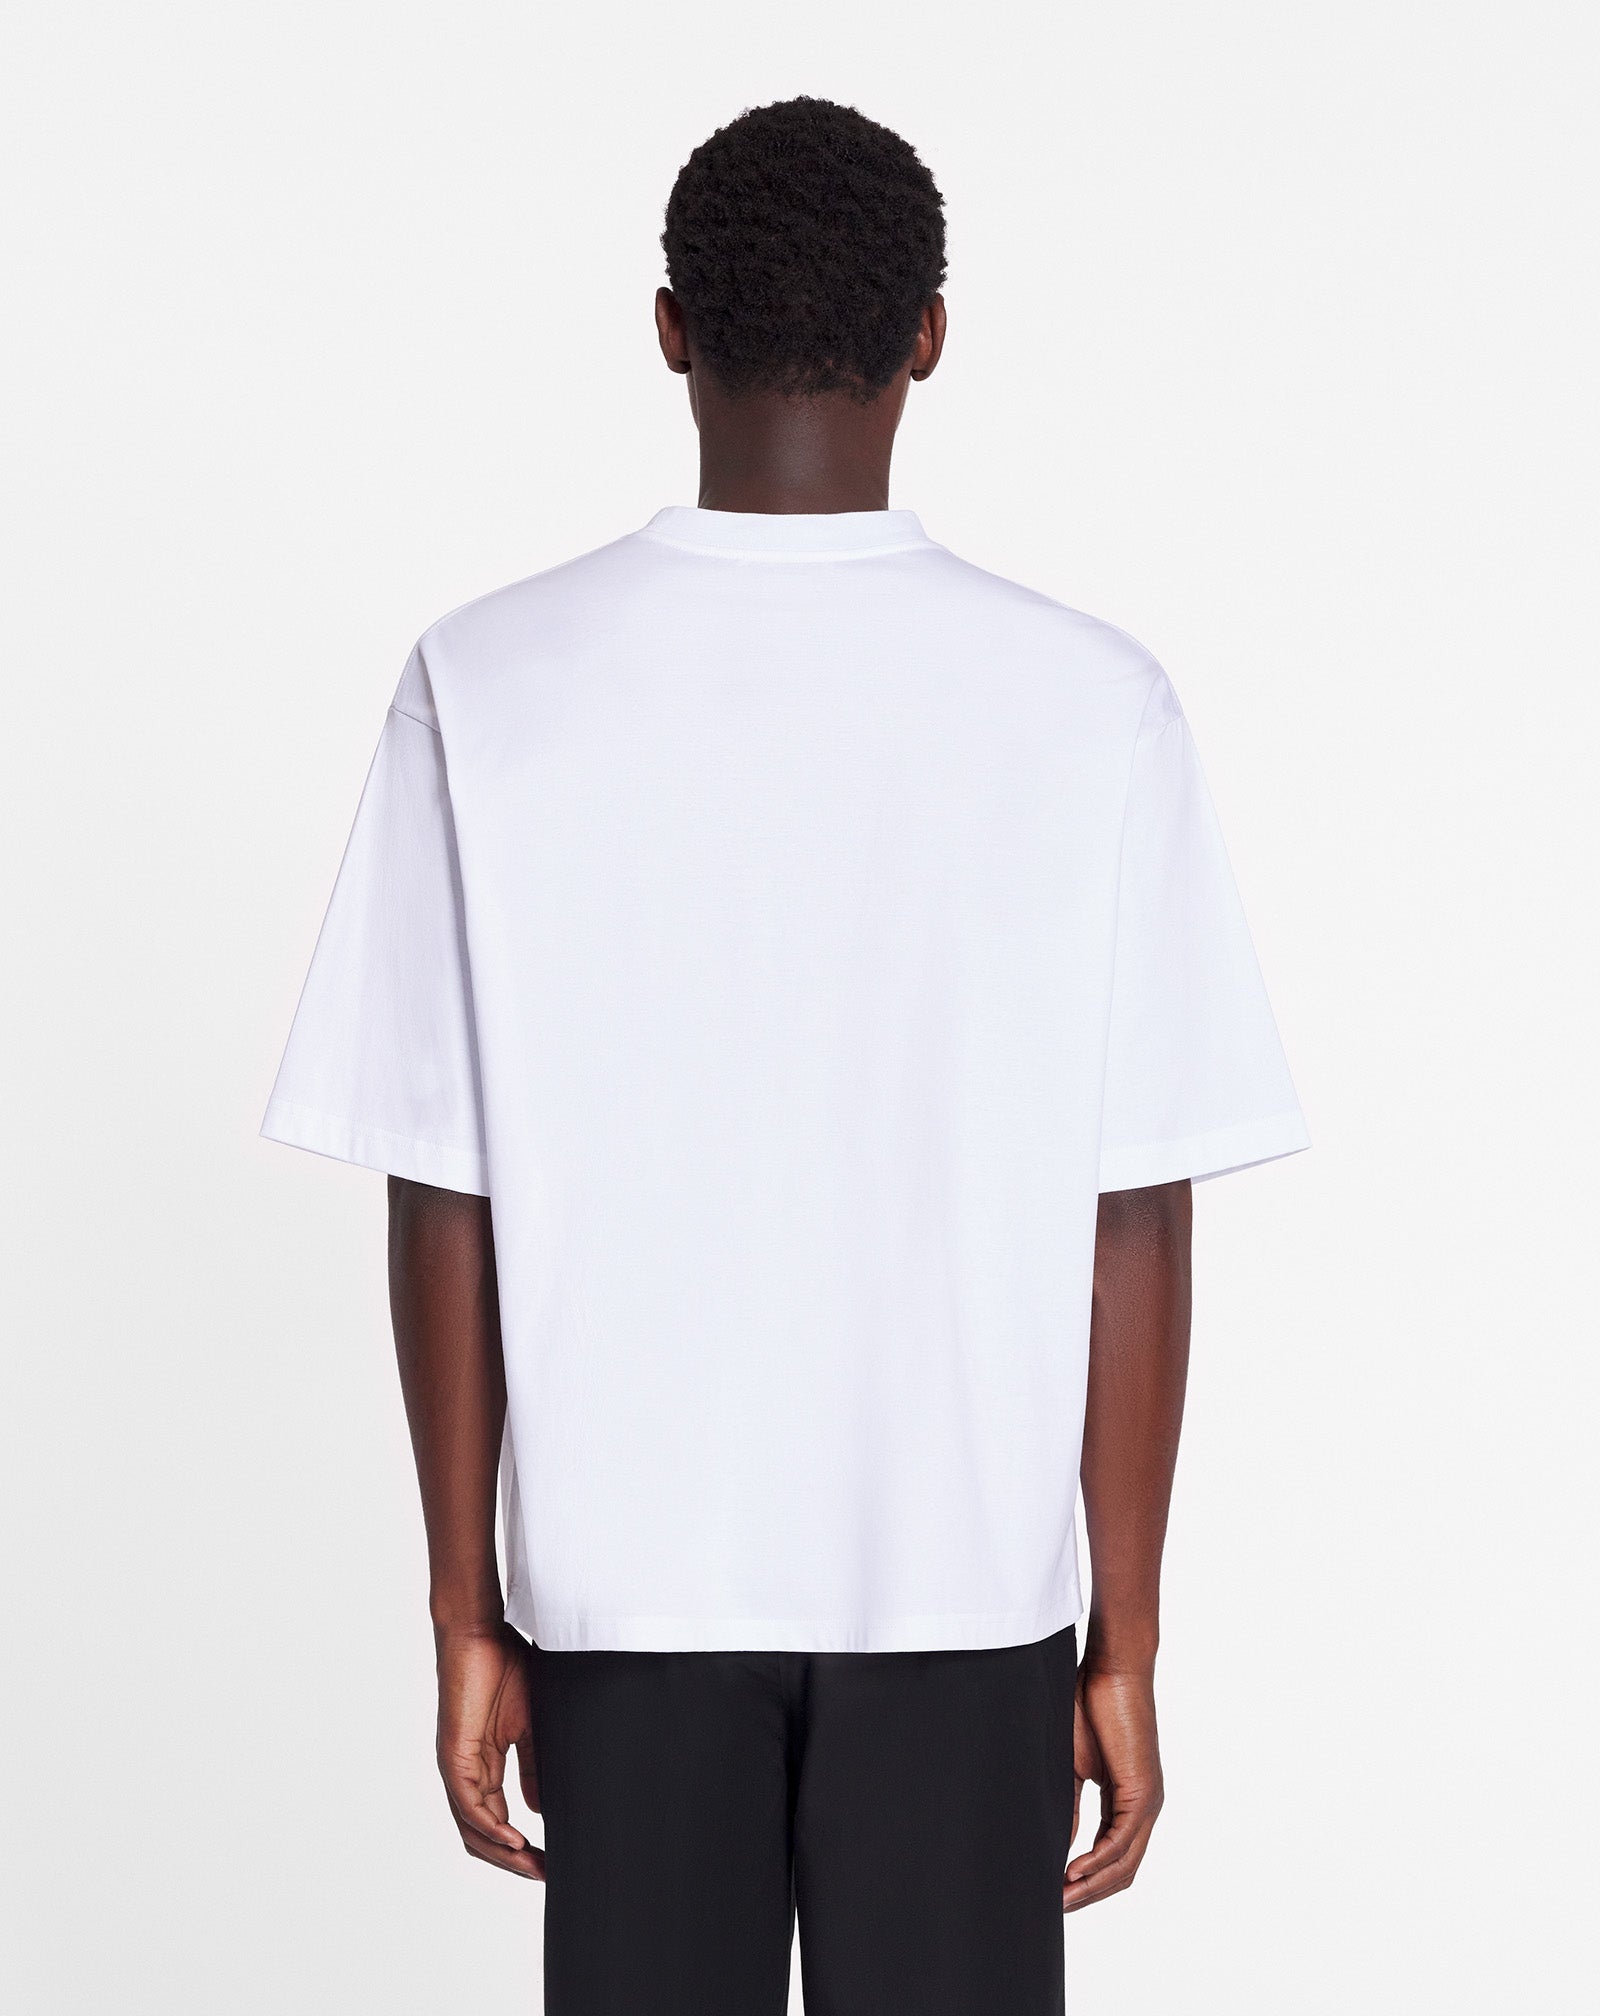 CURB LANVIN EMBROIDERED OVERSIZED T-SHIRT - 4